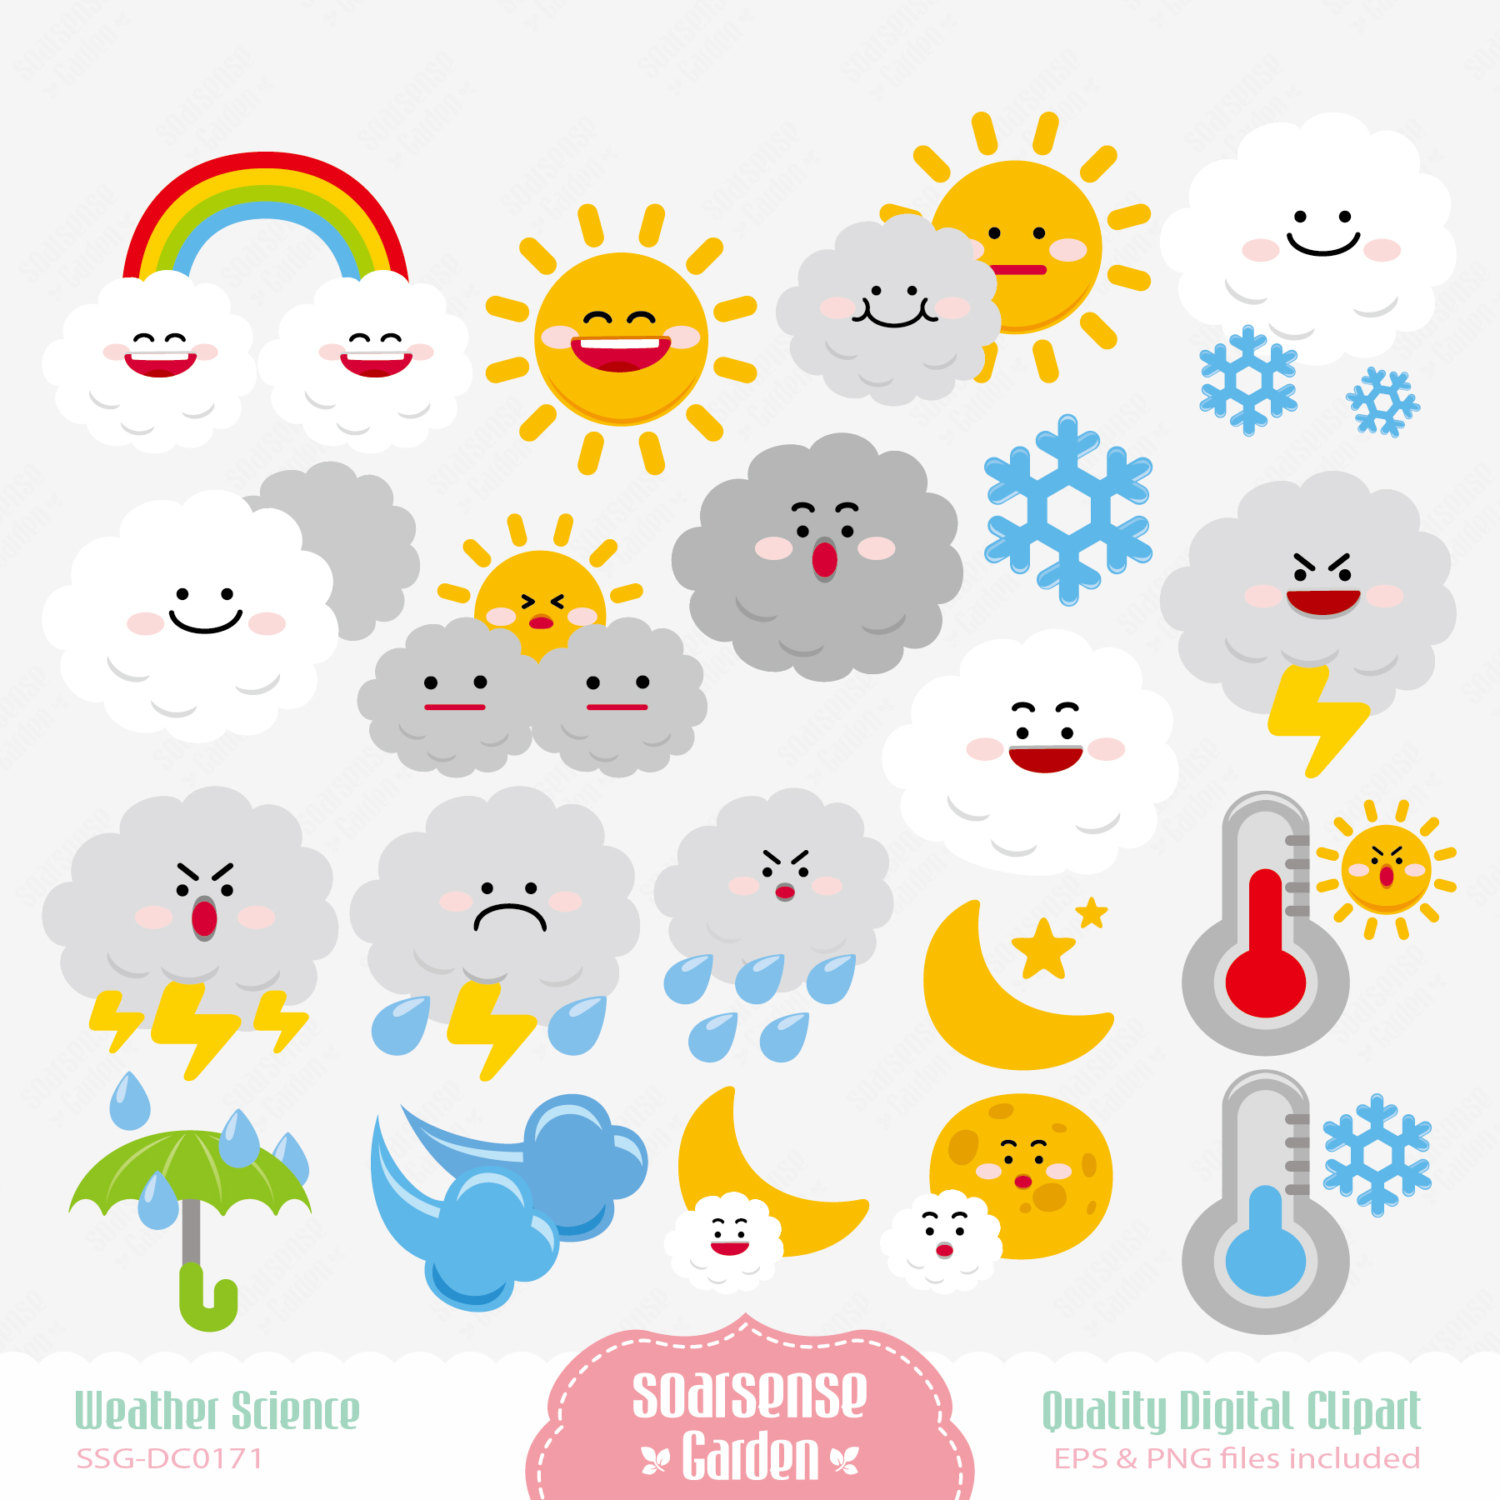 Clipart Weather -. 0fe6378838